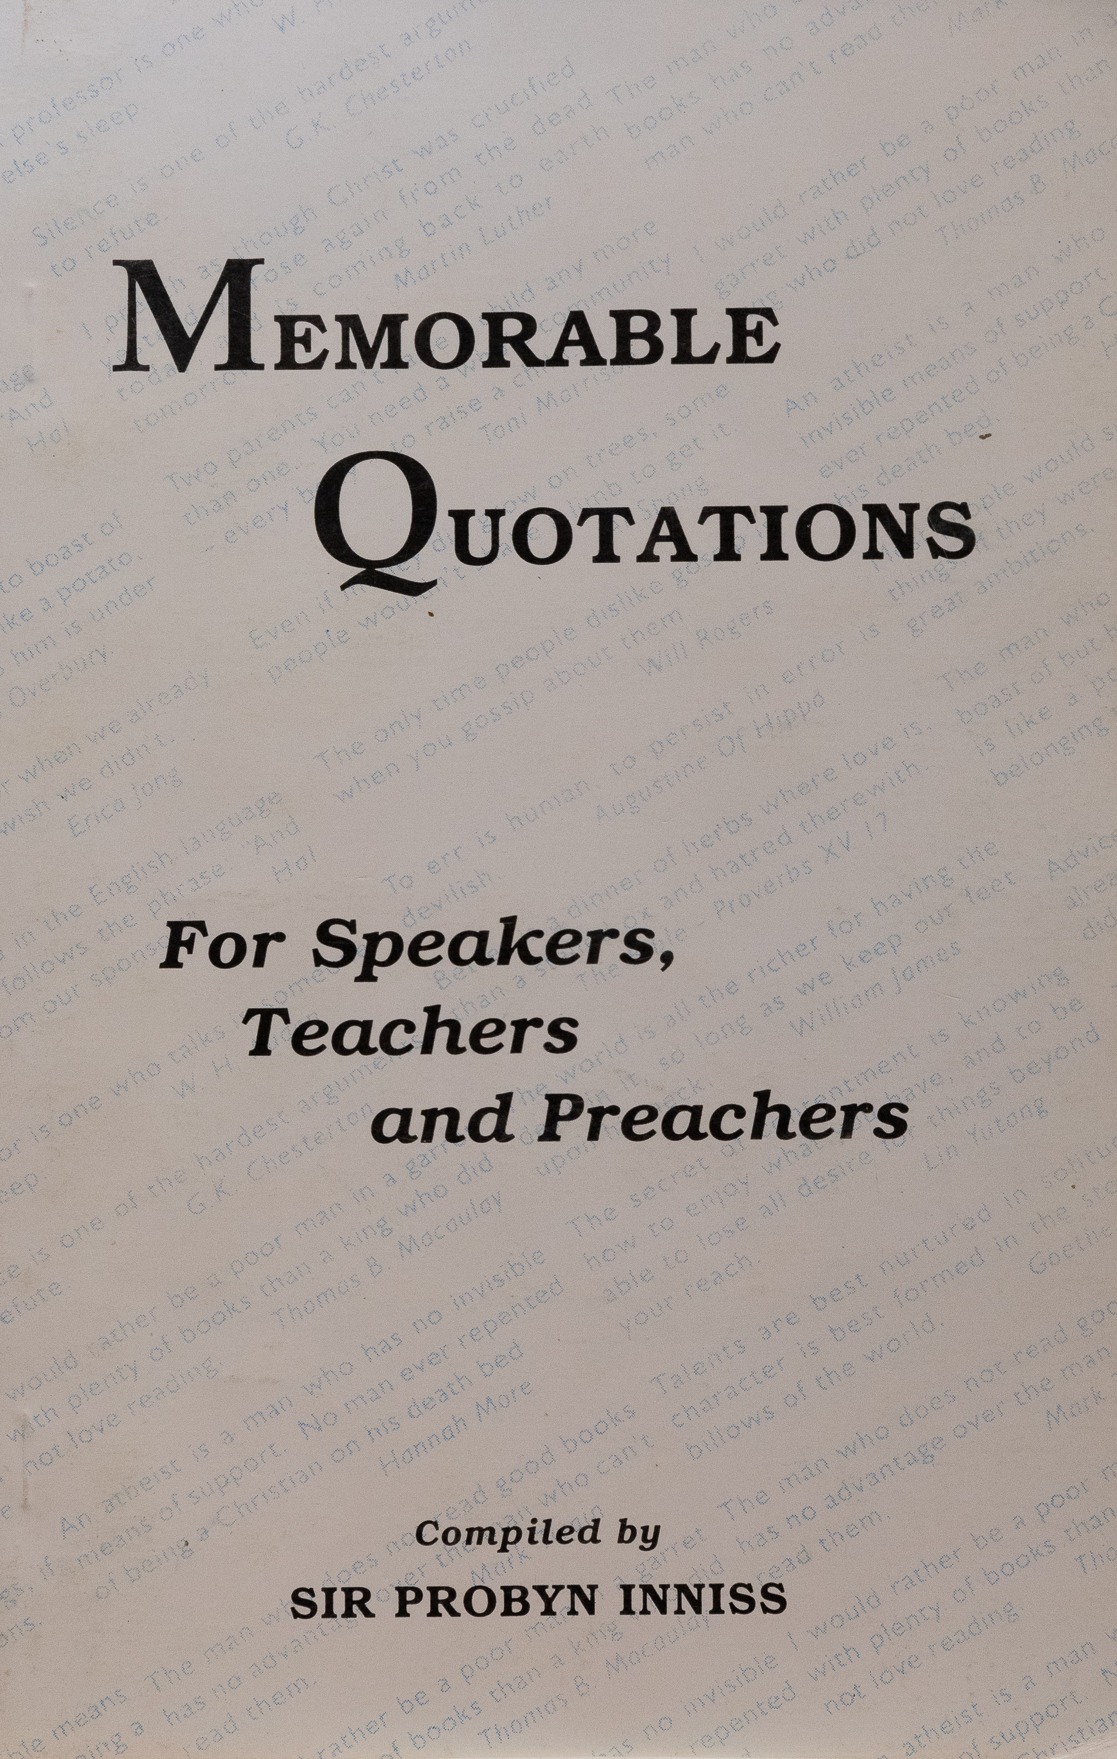 Memorable Quotations for Speakers, Teachers, and Preachers